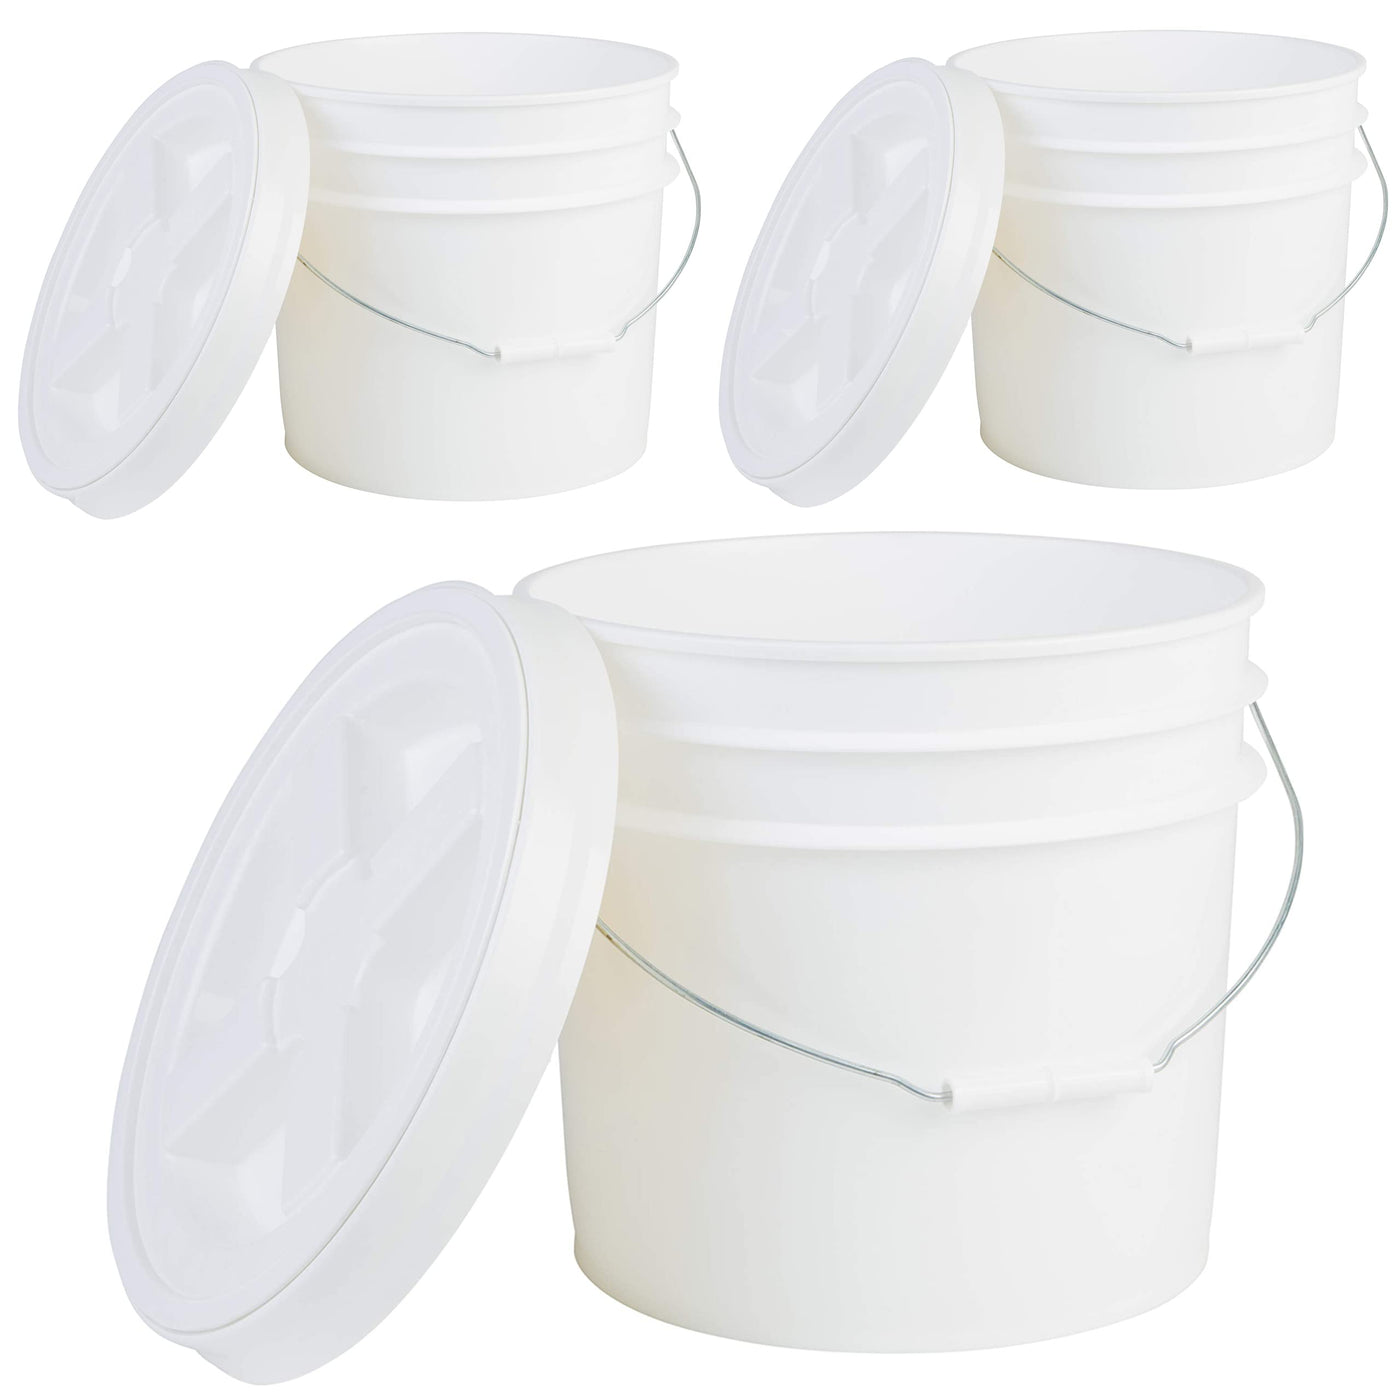 3.5 Gallon Buckets With Gamma Seal Lids, Free Shipping